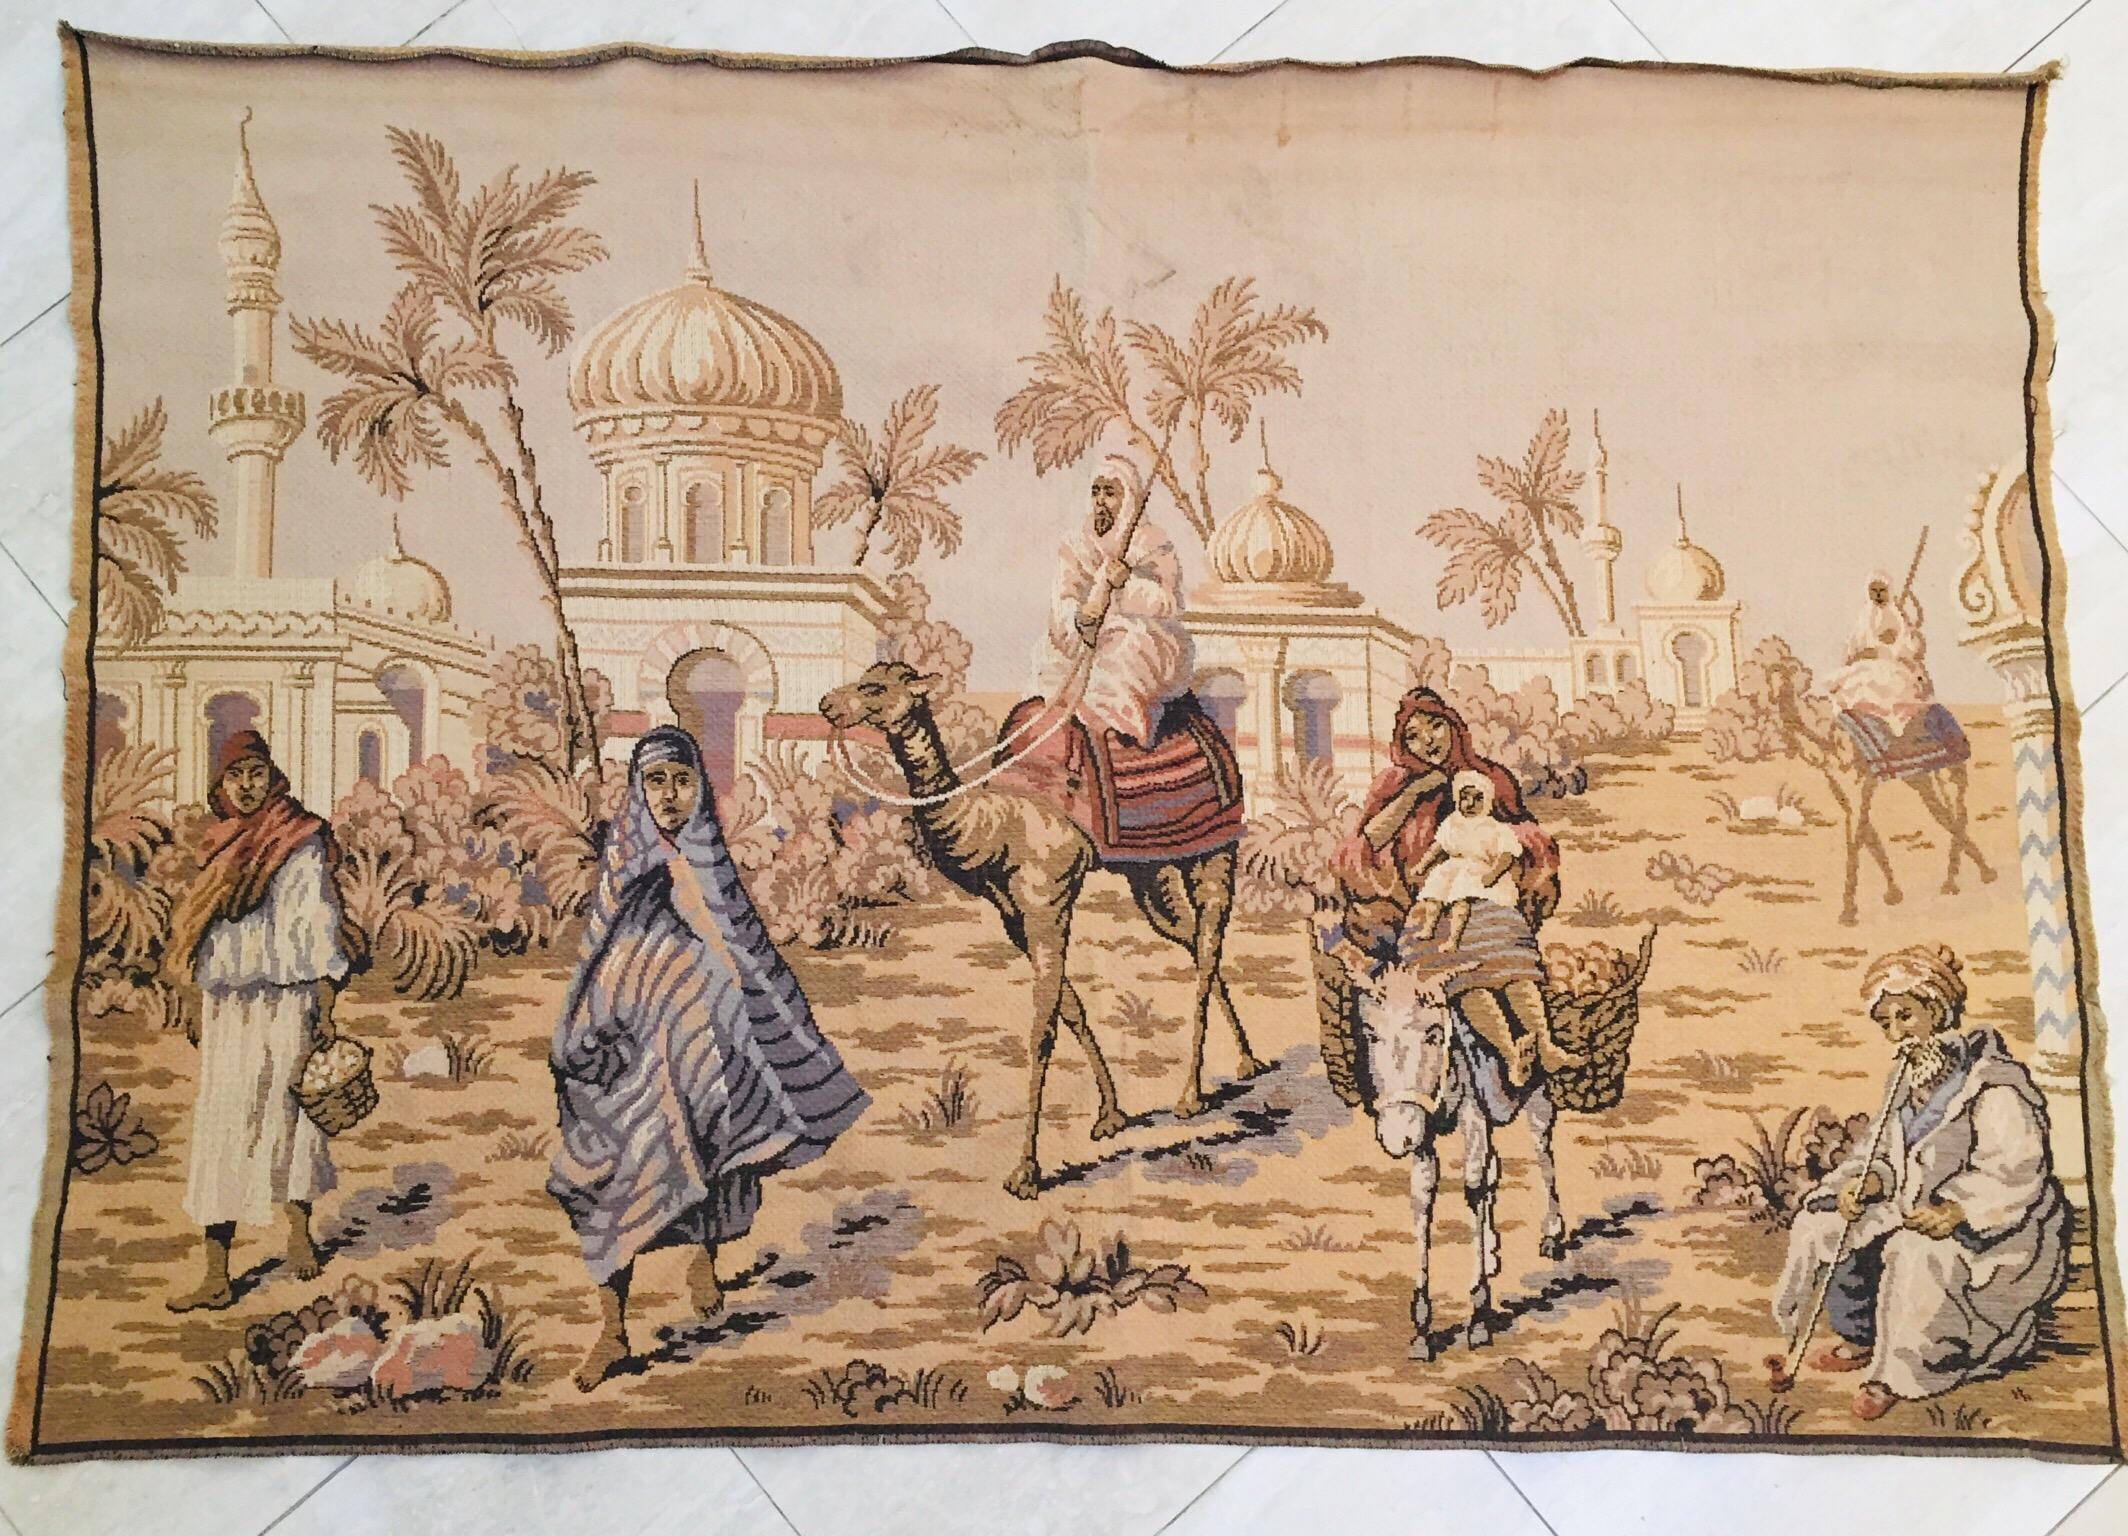 Large Aubusson style tapestry with an orientalist 19th century scene depicting Arabs figures and Middle Eastern Moorish architecture in the background.
Probably a scene in North Africa, Morocco, with a master on camel and women on a donkey and